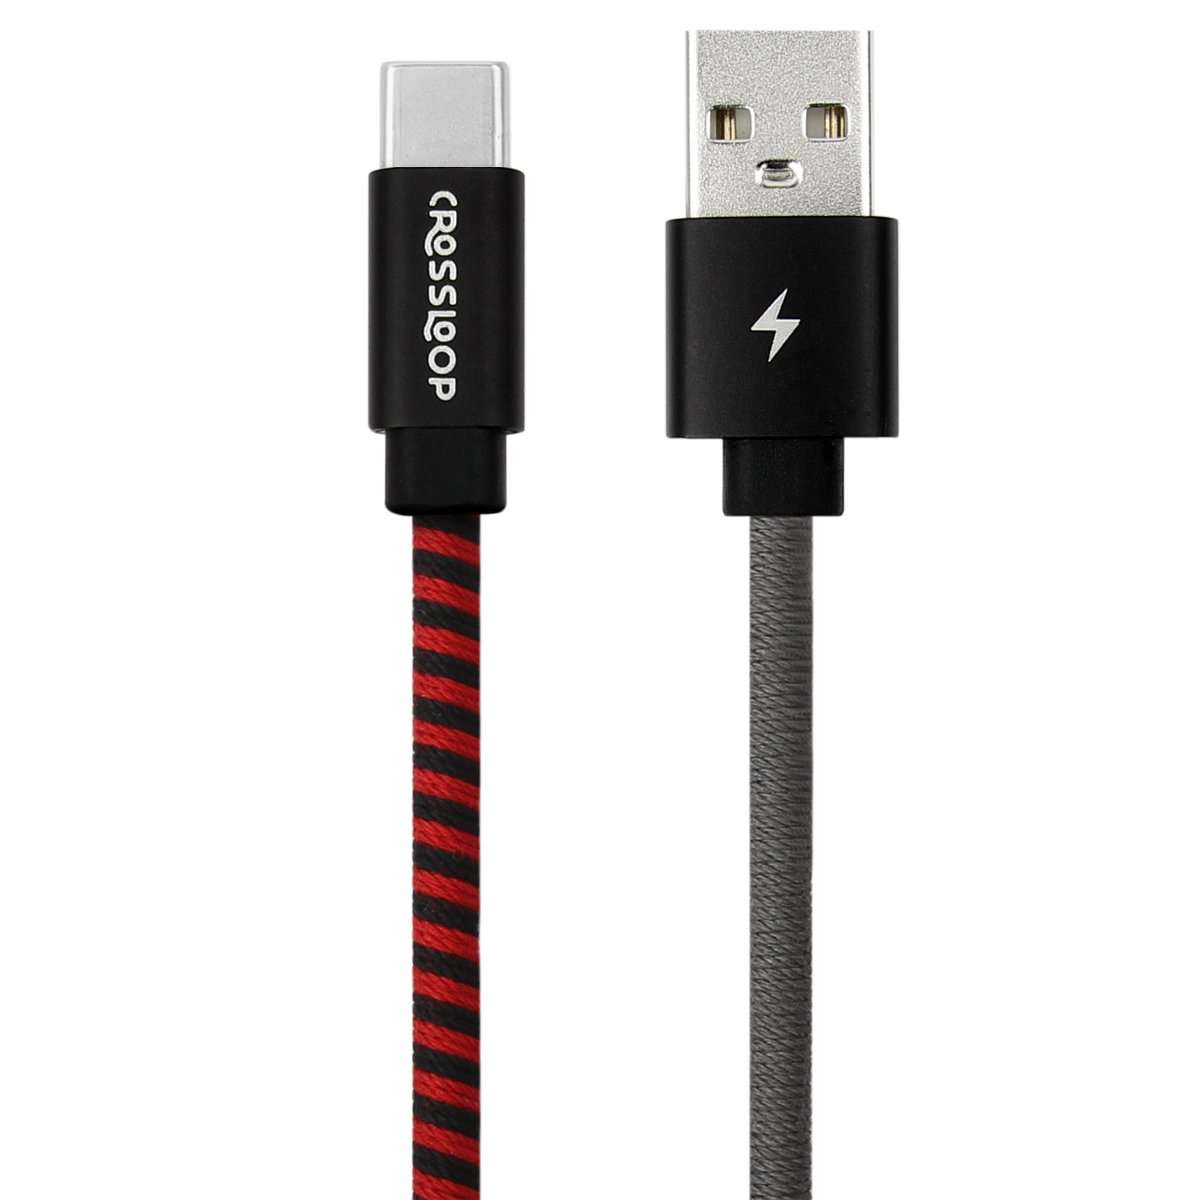 Type C fast charging cable in red & black